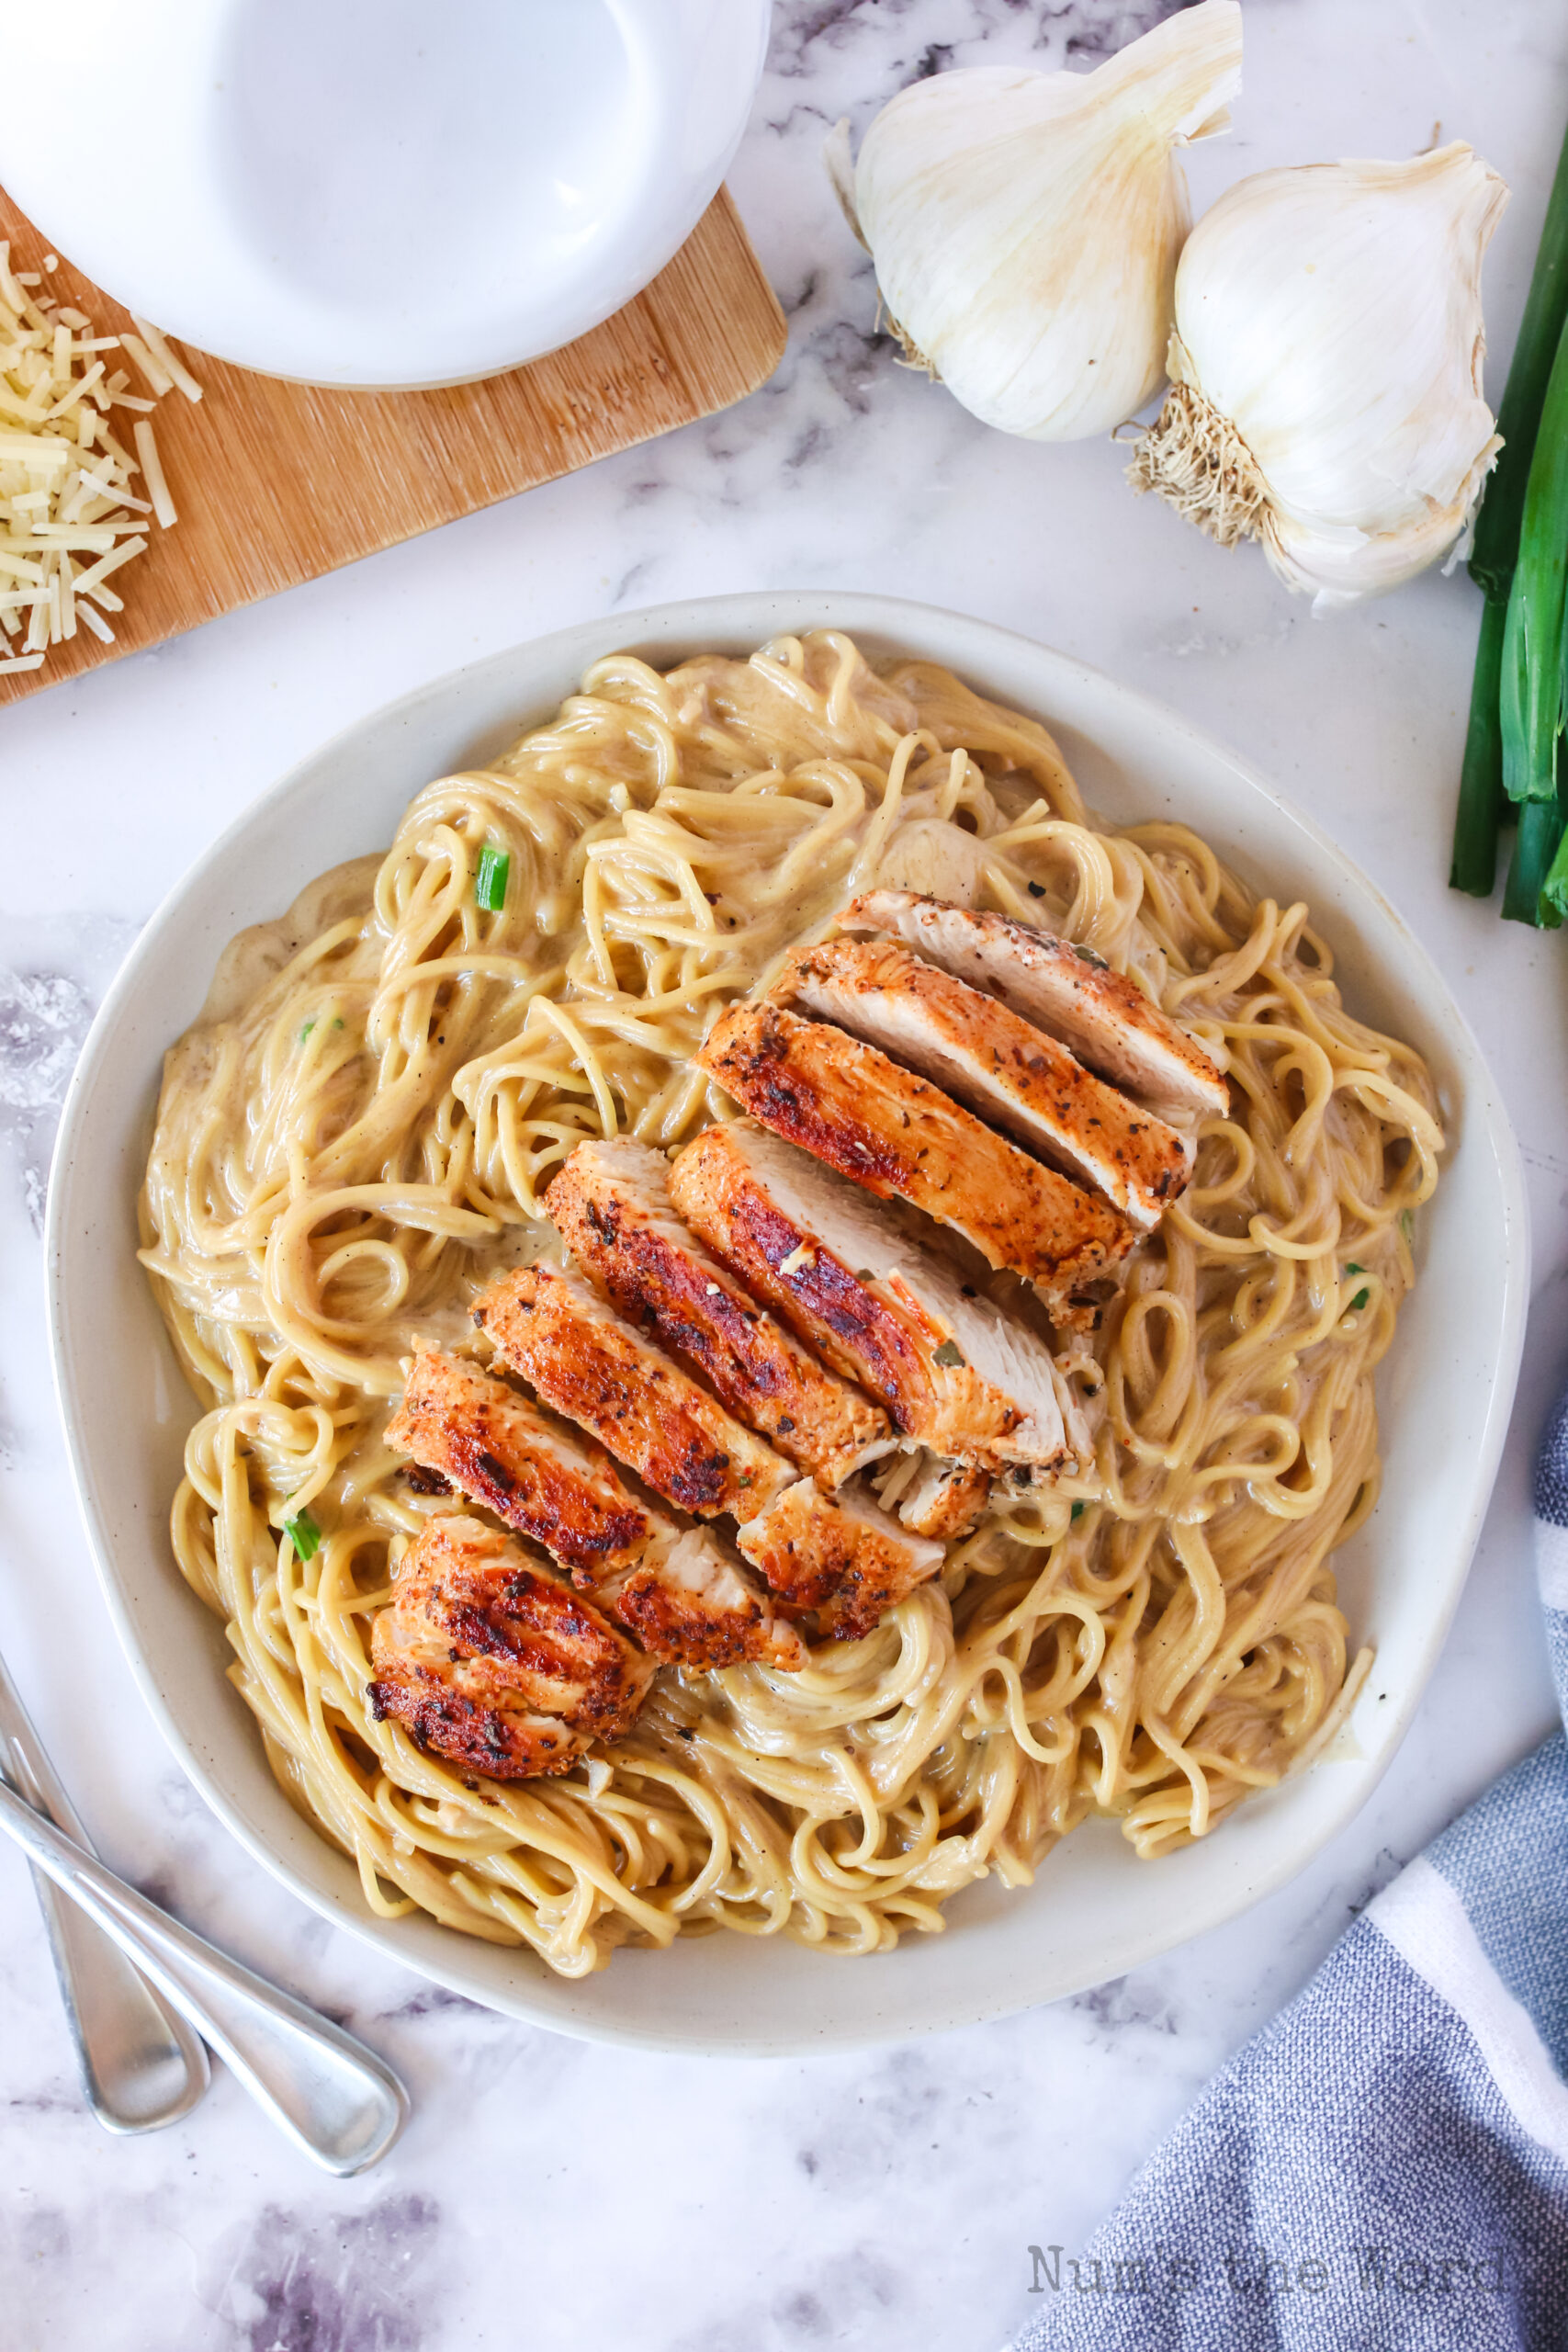 zoomed out image of sliced chicken breast on a bed of creamy pasta